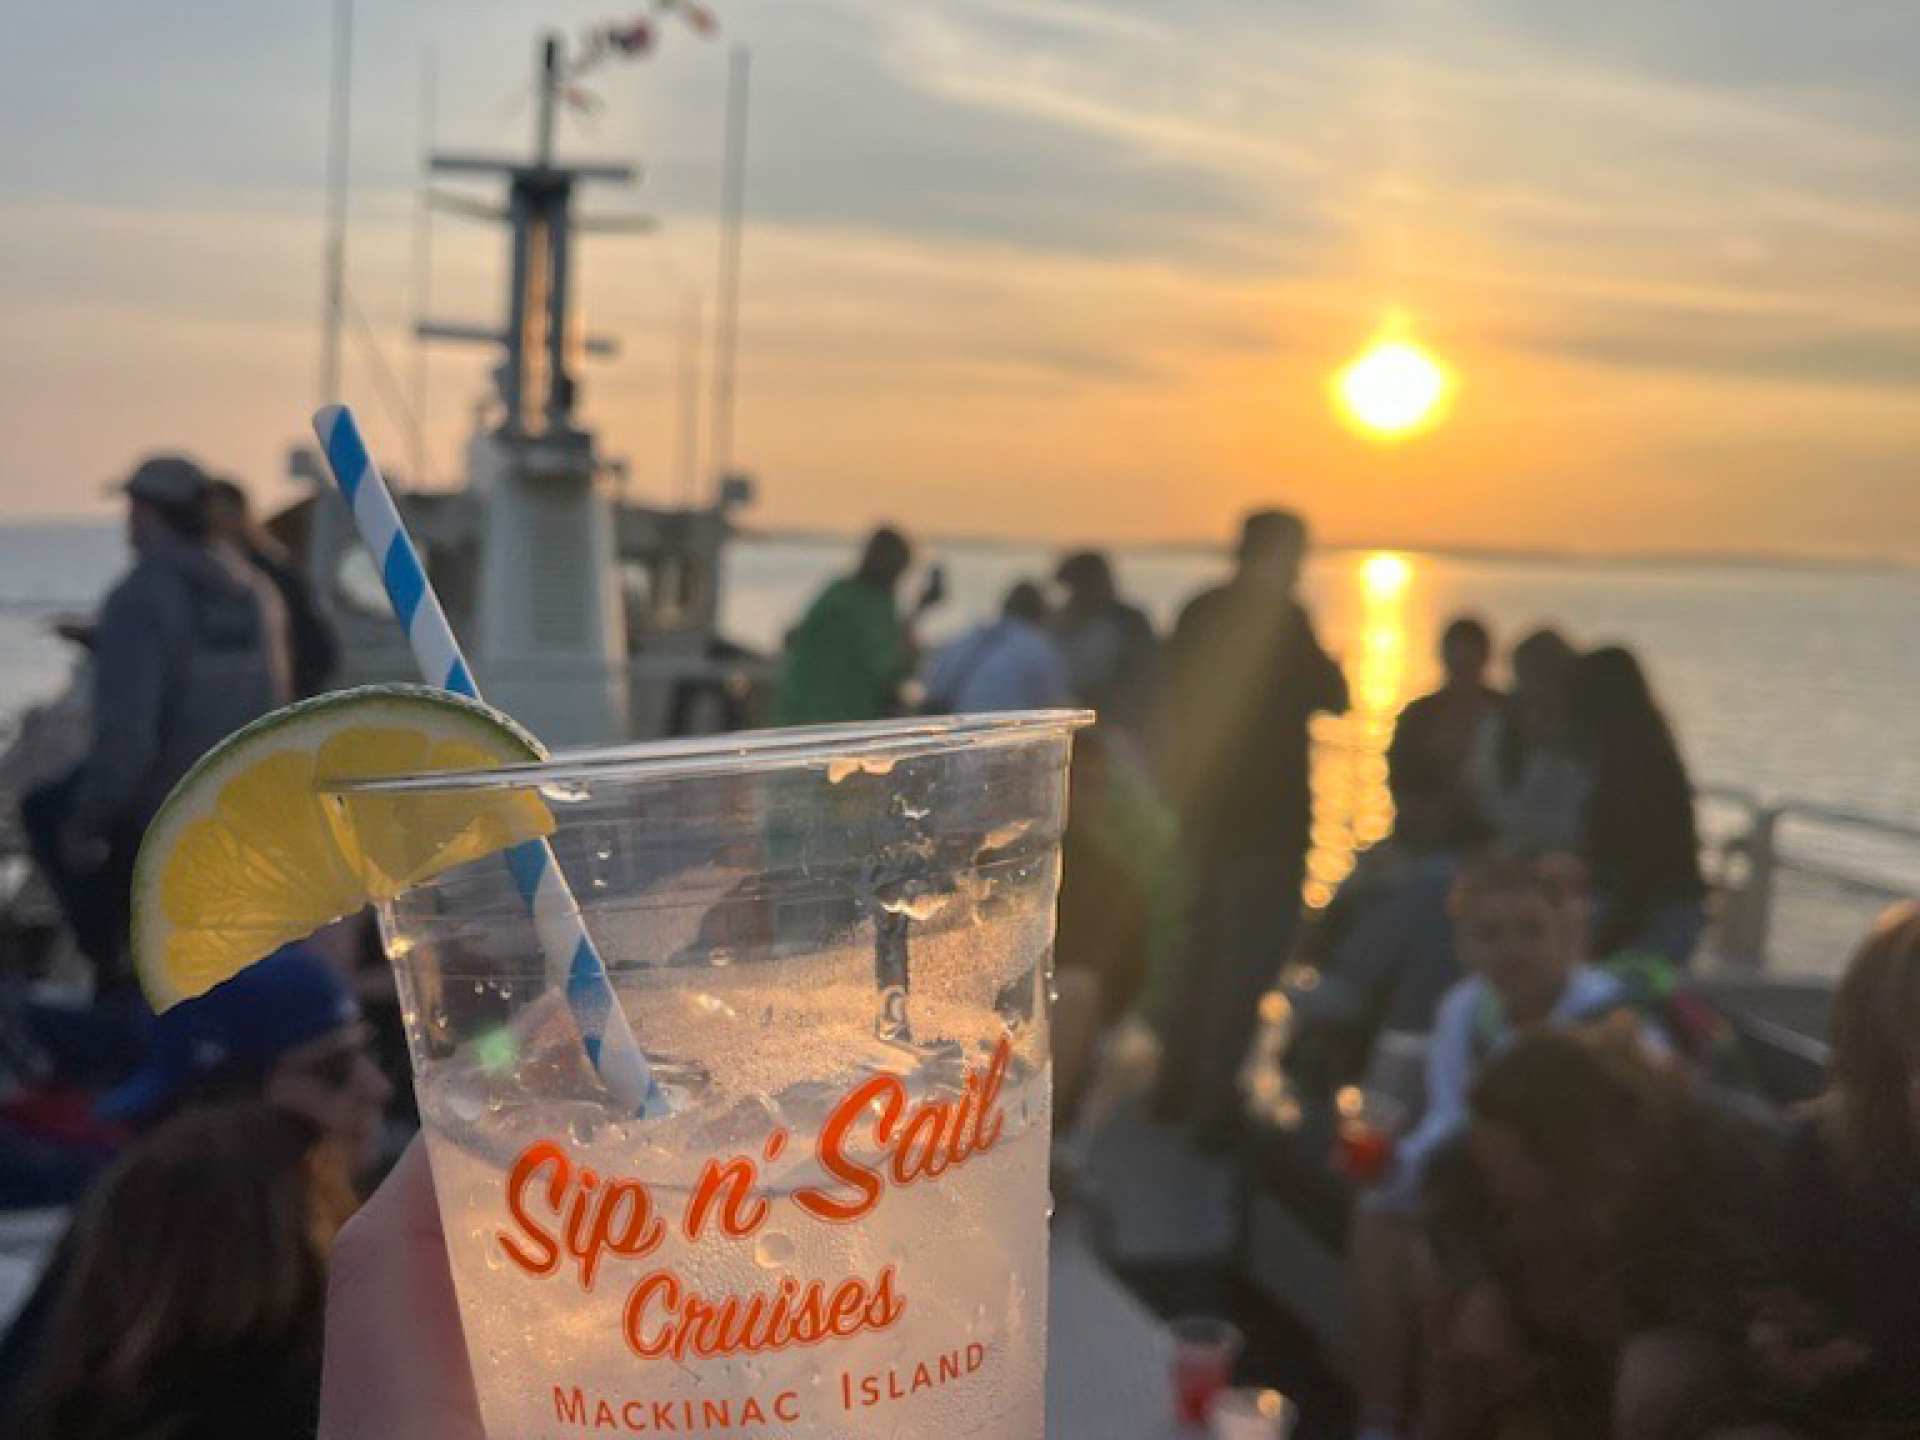 Mission Point | A person holding a drink on a boat looking out at the sunset on Mackinac Island